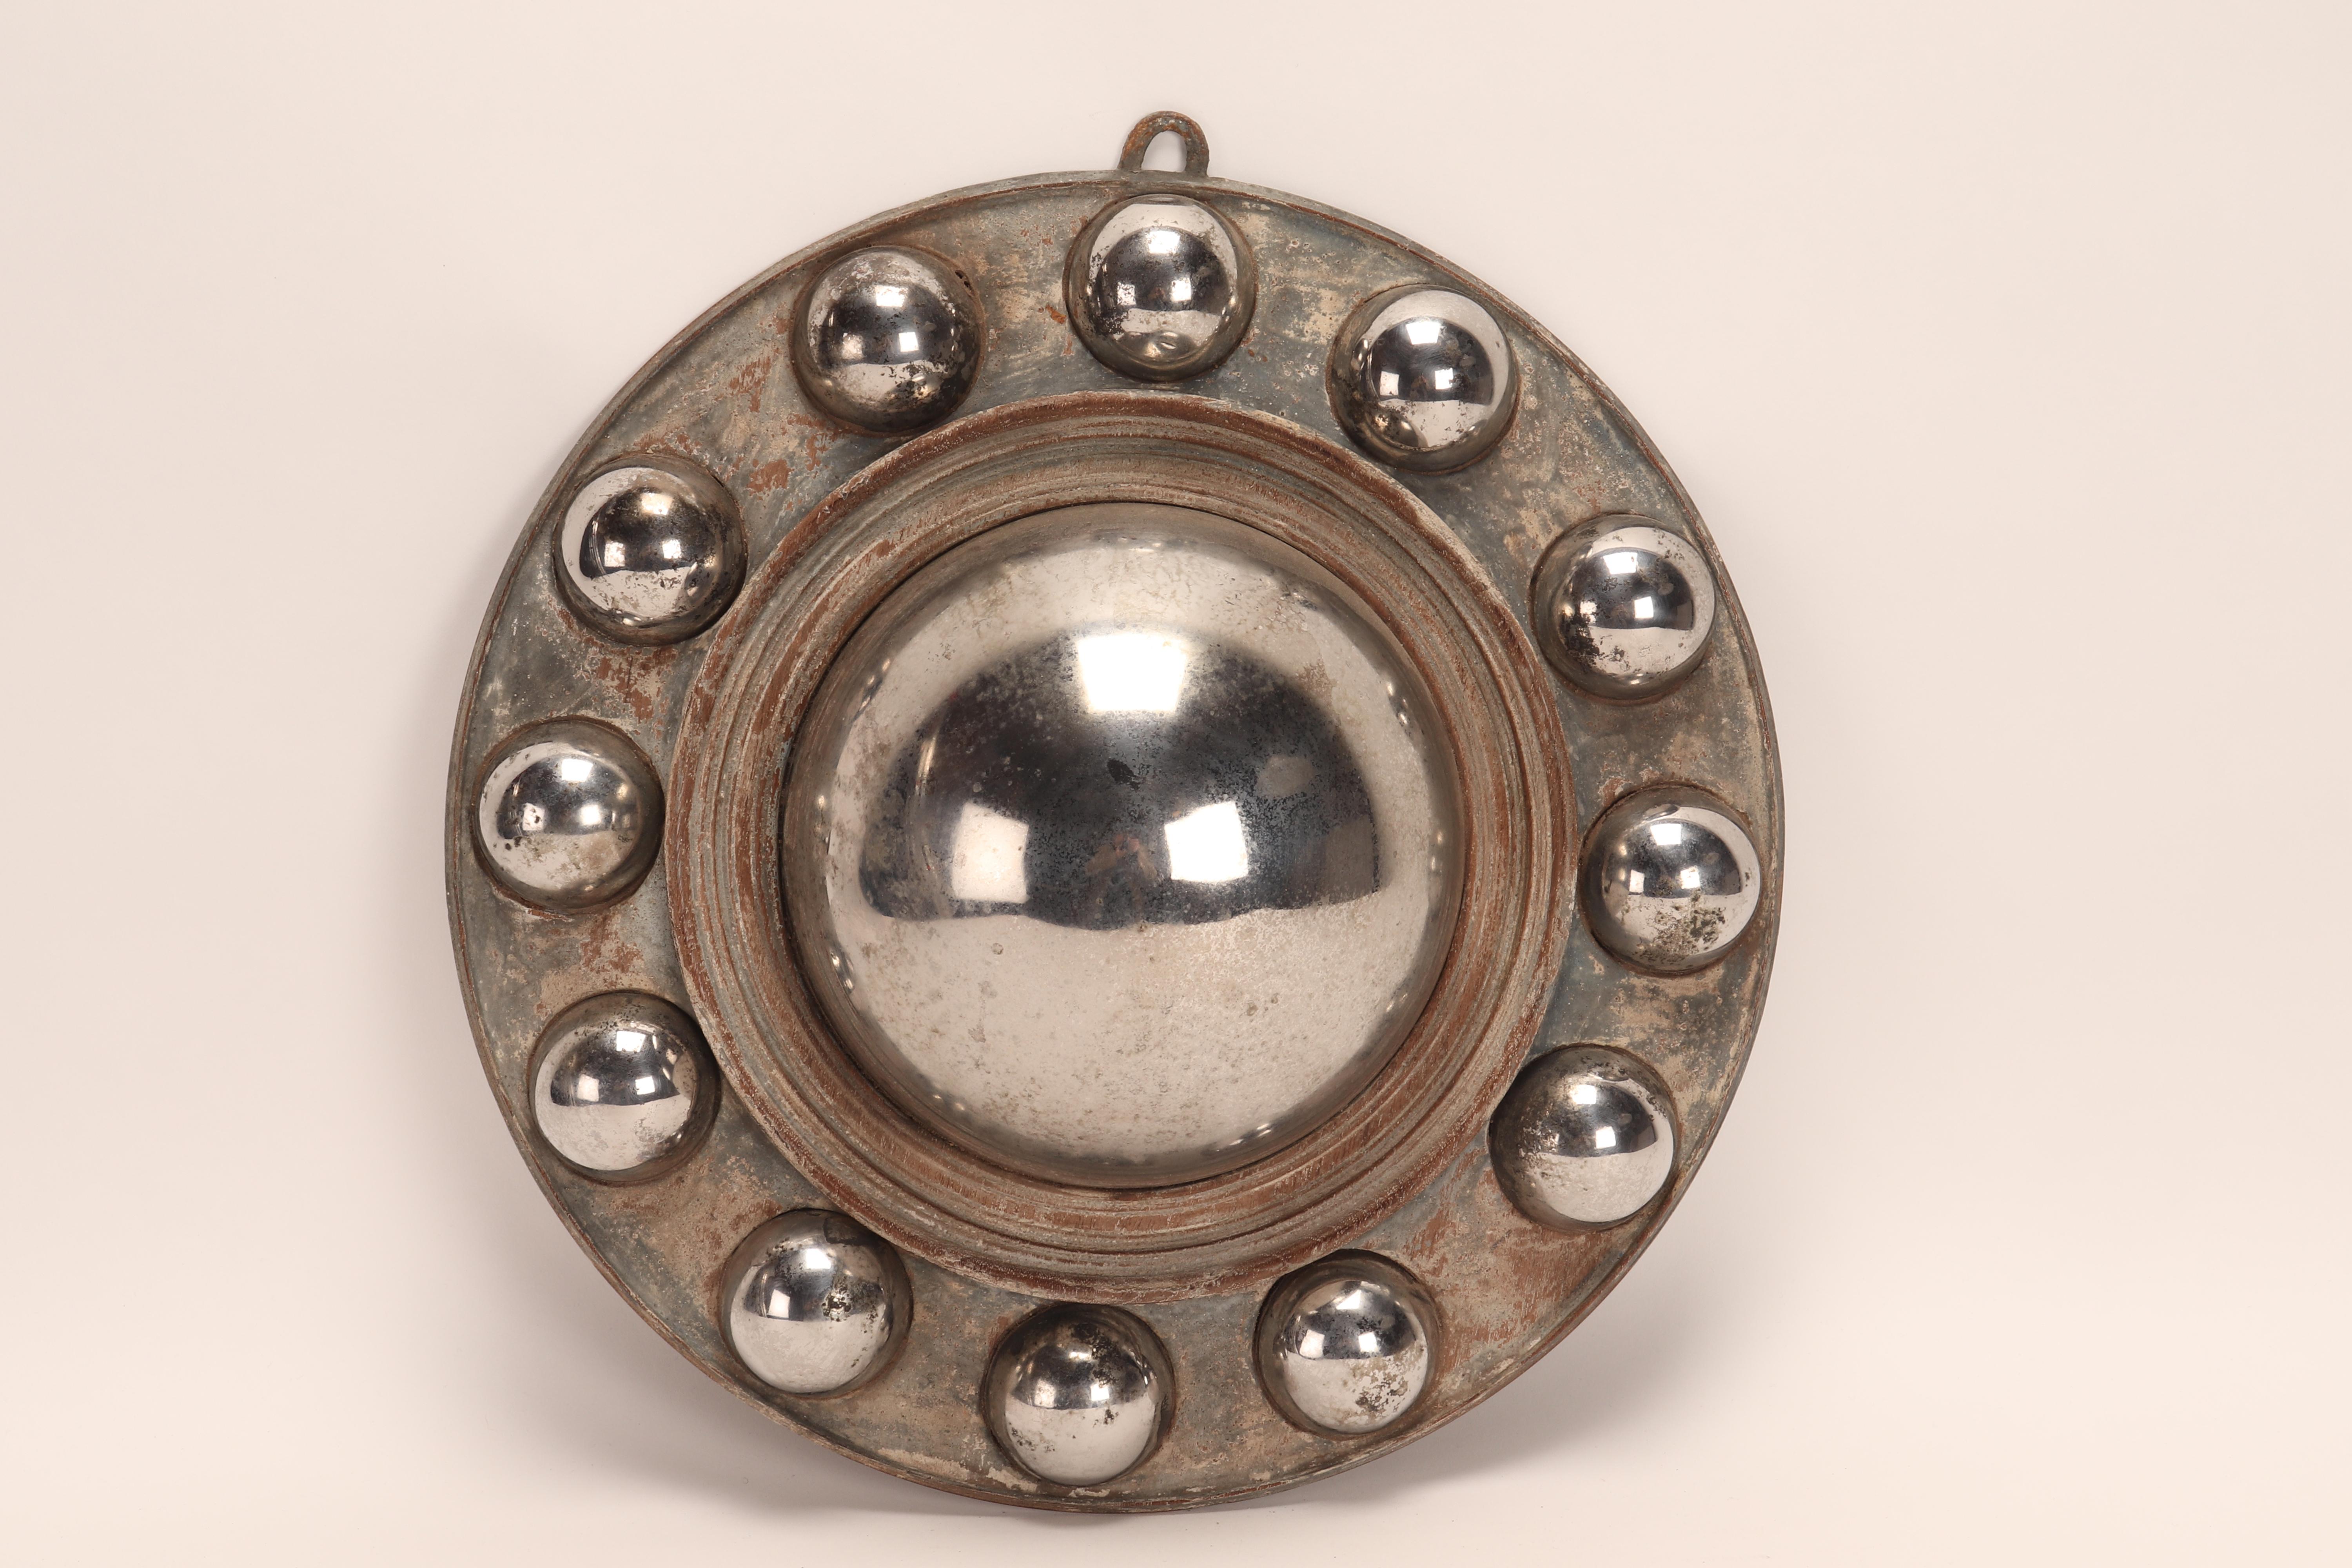 A large central convex metal mirror, with 12 small convex metal mirrors along the edge of the round frame. These convex mirrors were called 